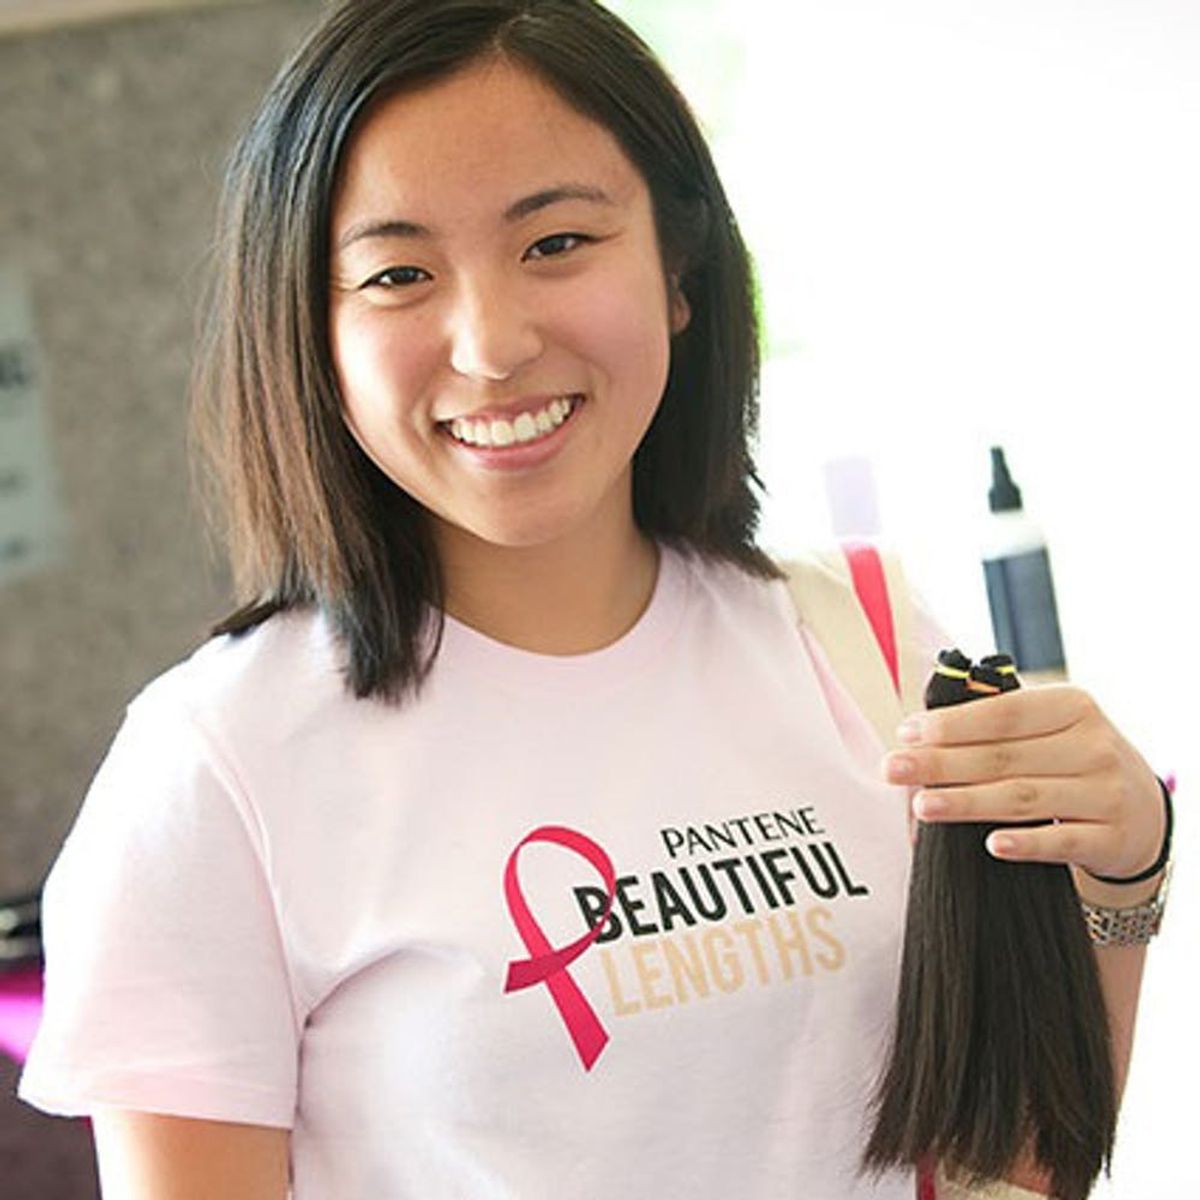 4 Awesome Ways to Donate Your Hair